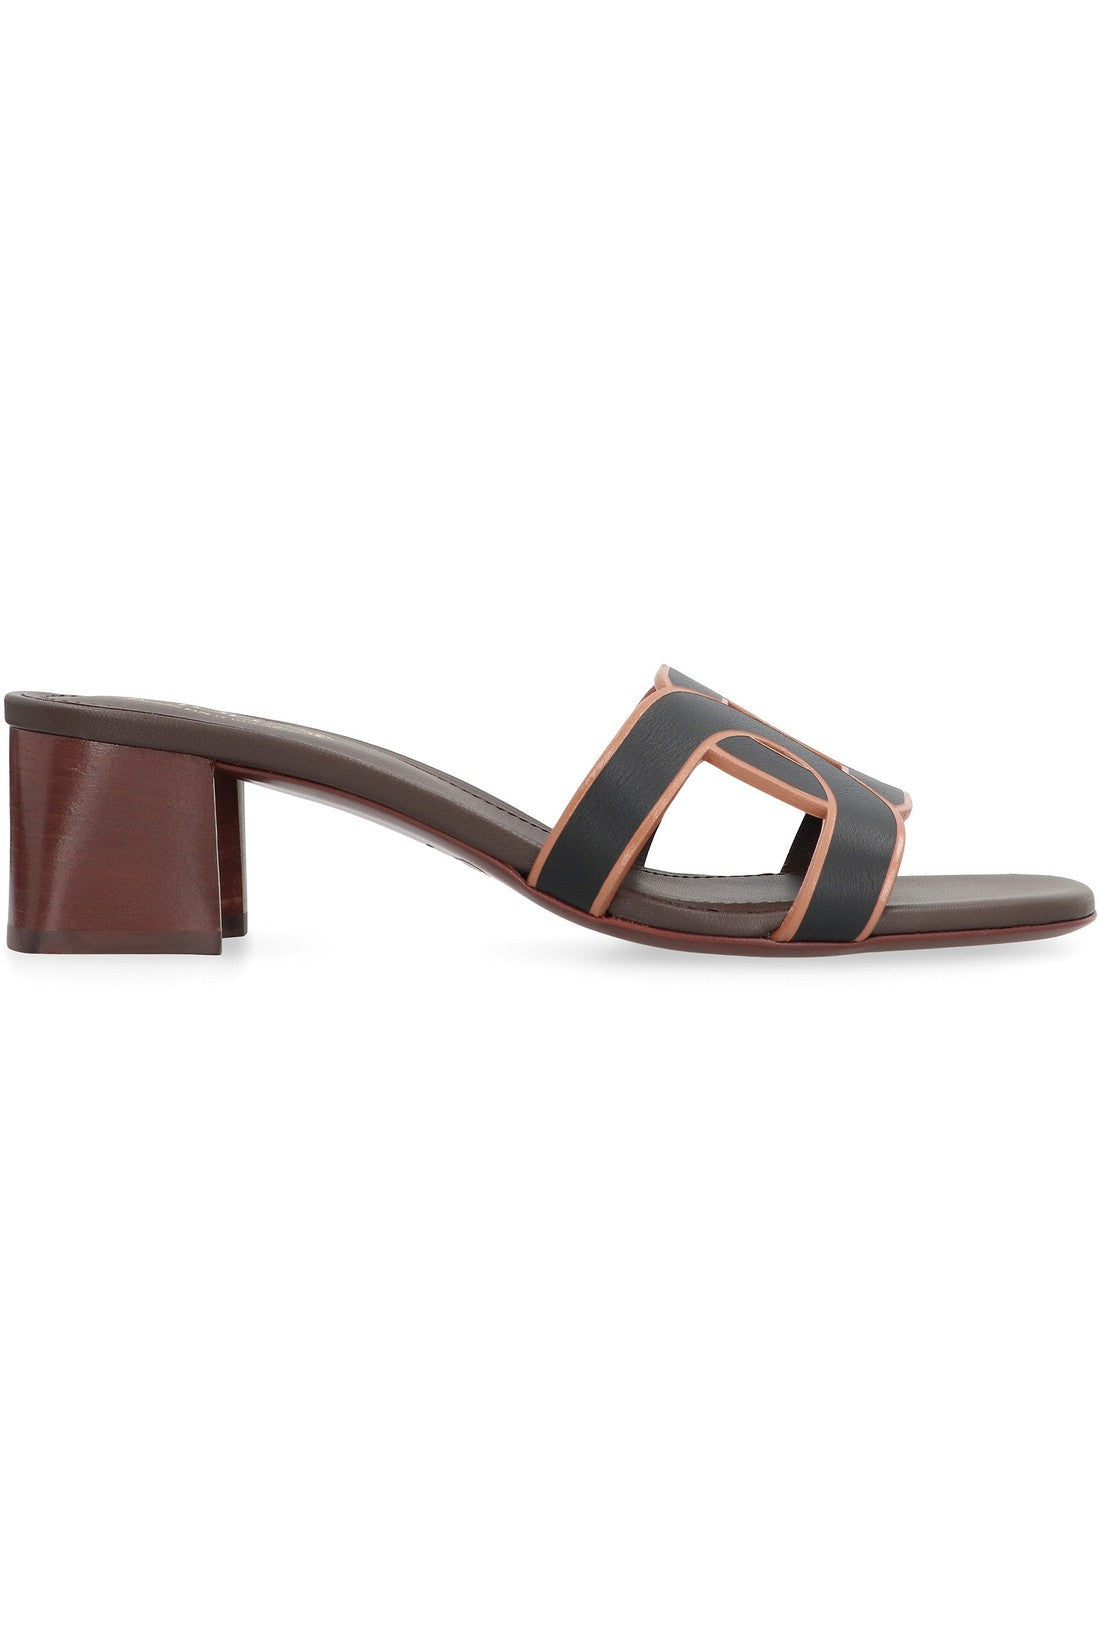 Tod's-OUTLET-SALE-Leather mules-ARCHIVIST